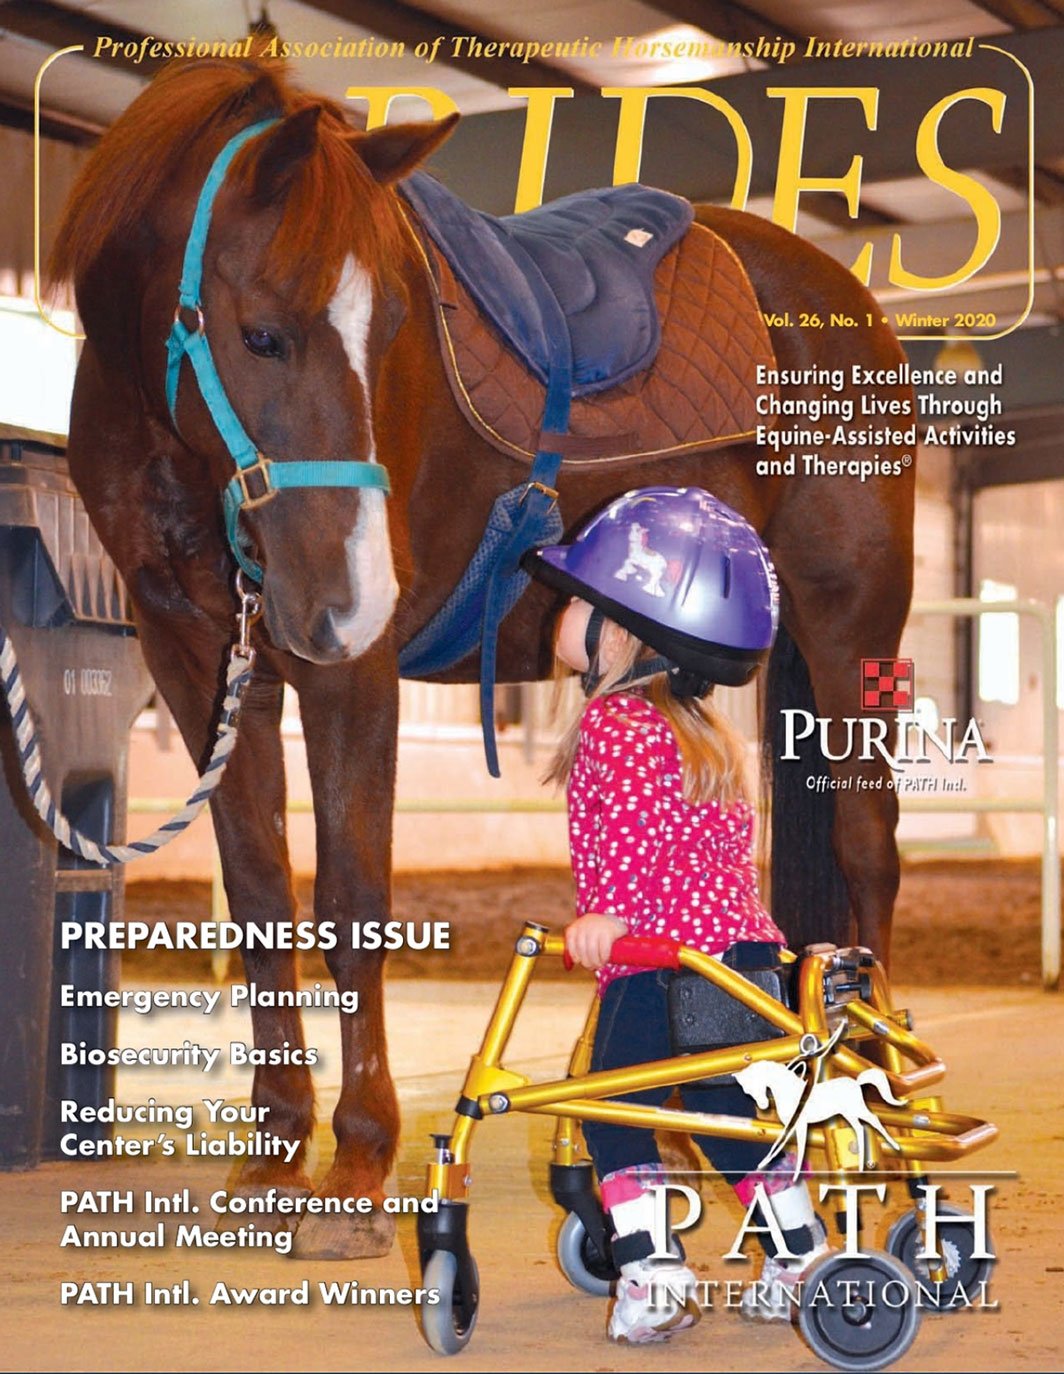 Strides-winter-2020-cover